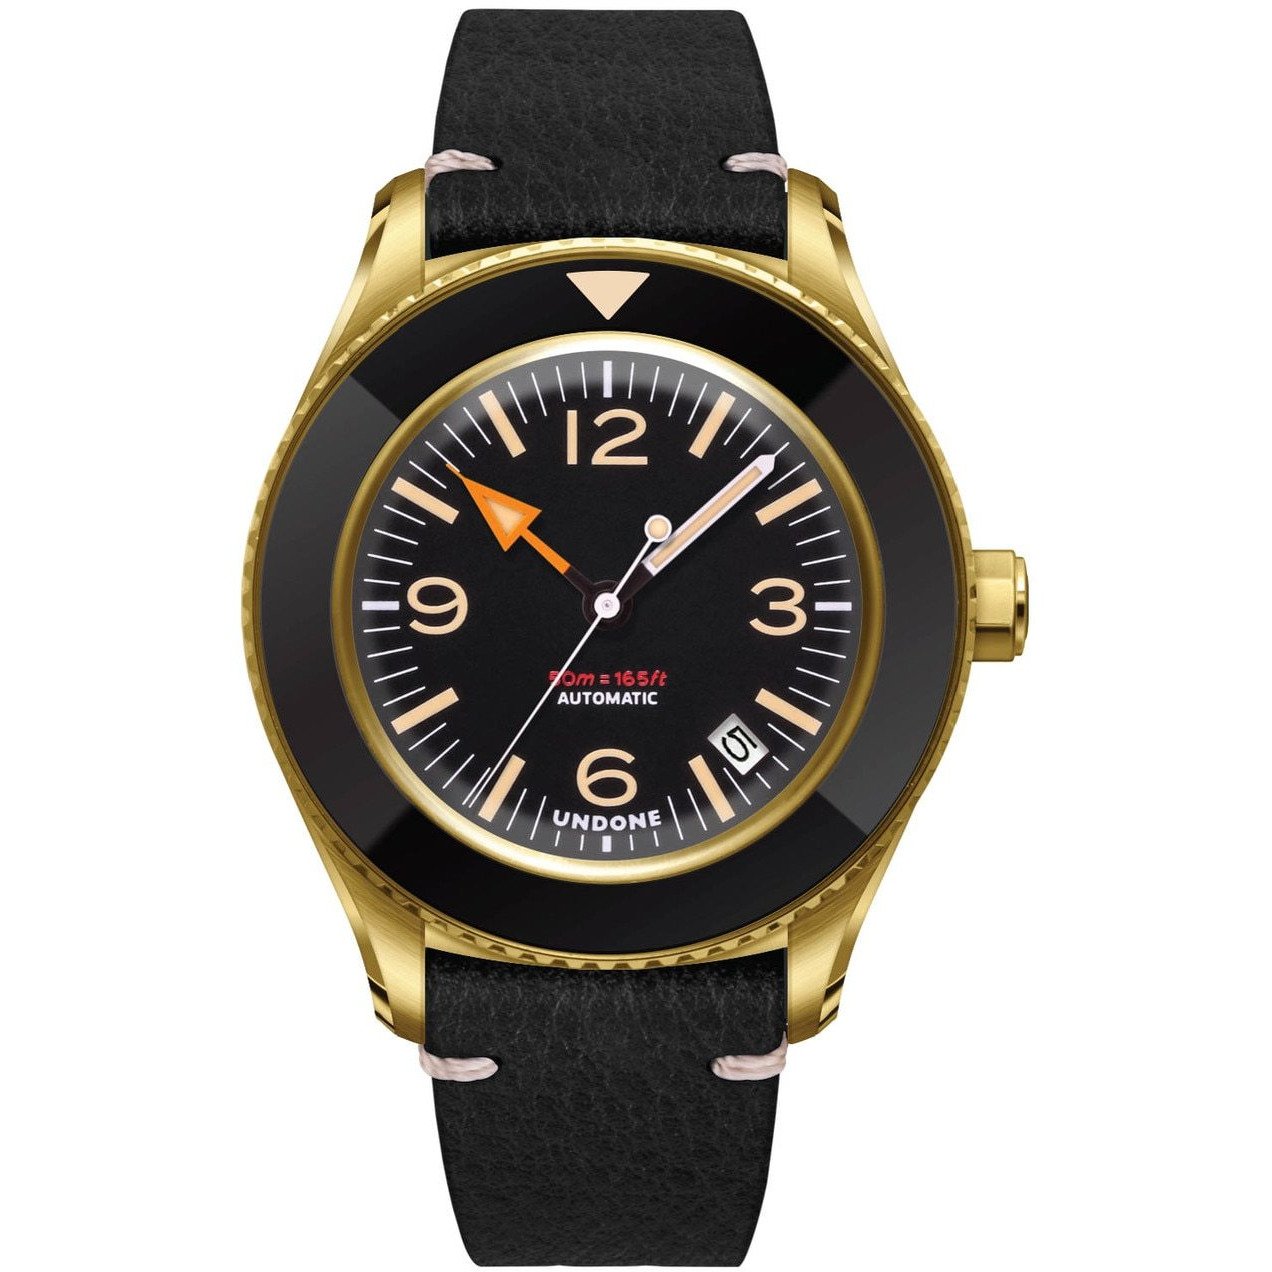 Undone Basecamp Automatic Gold Limited Edition